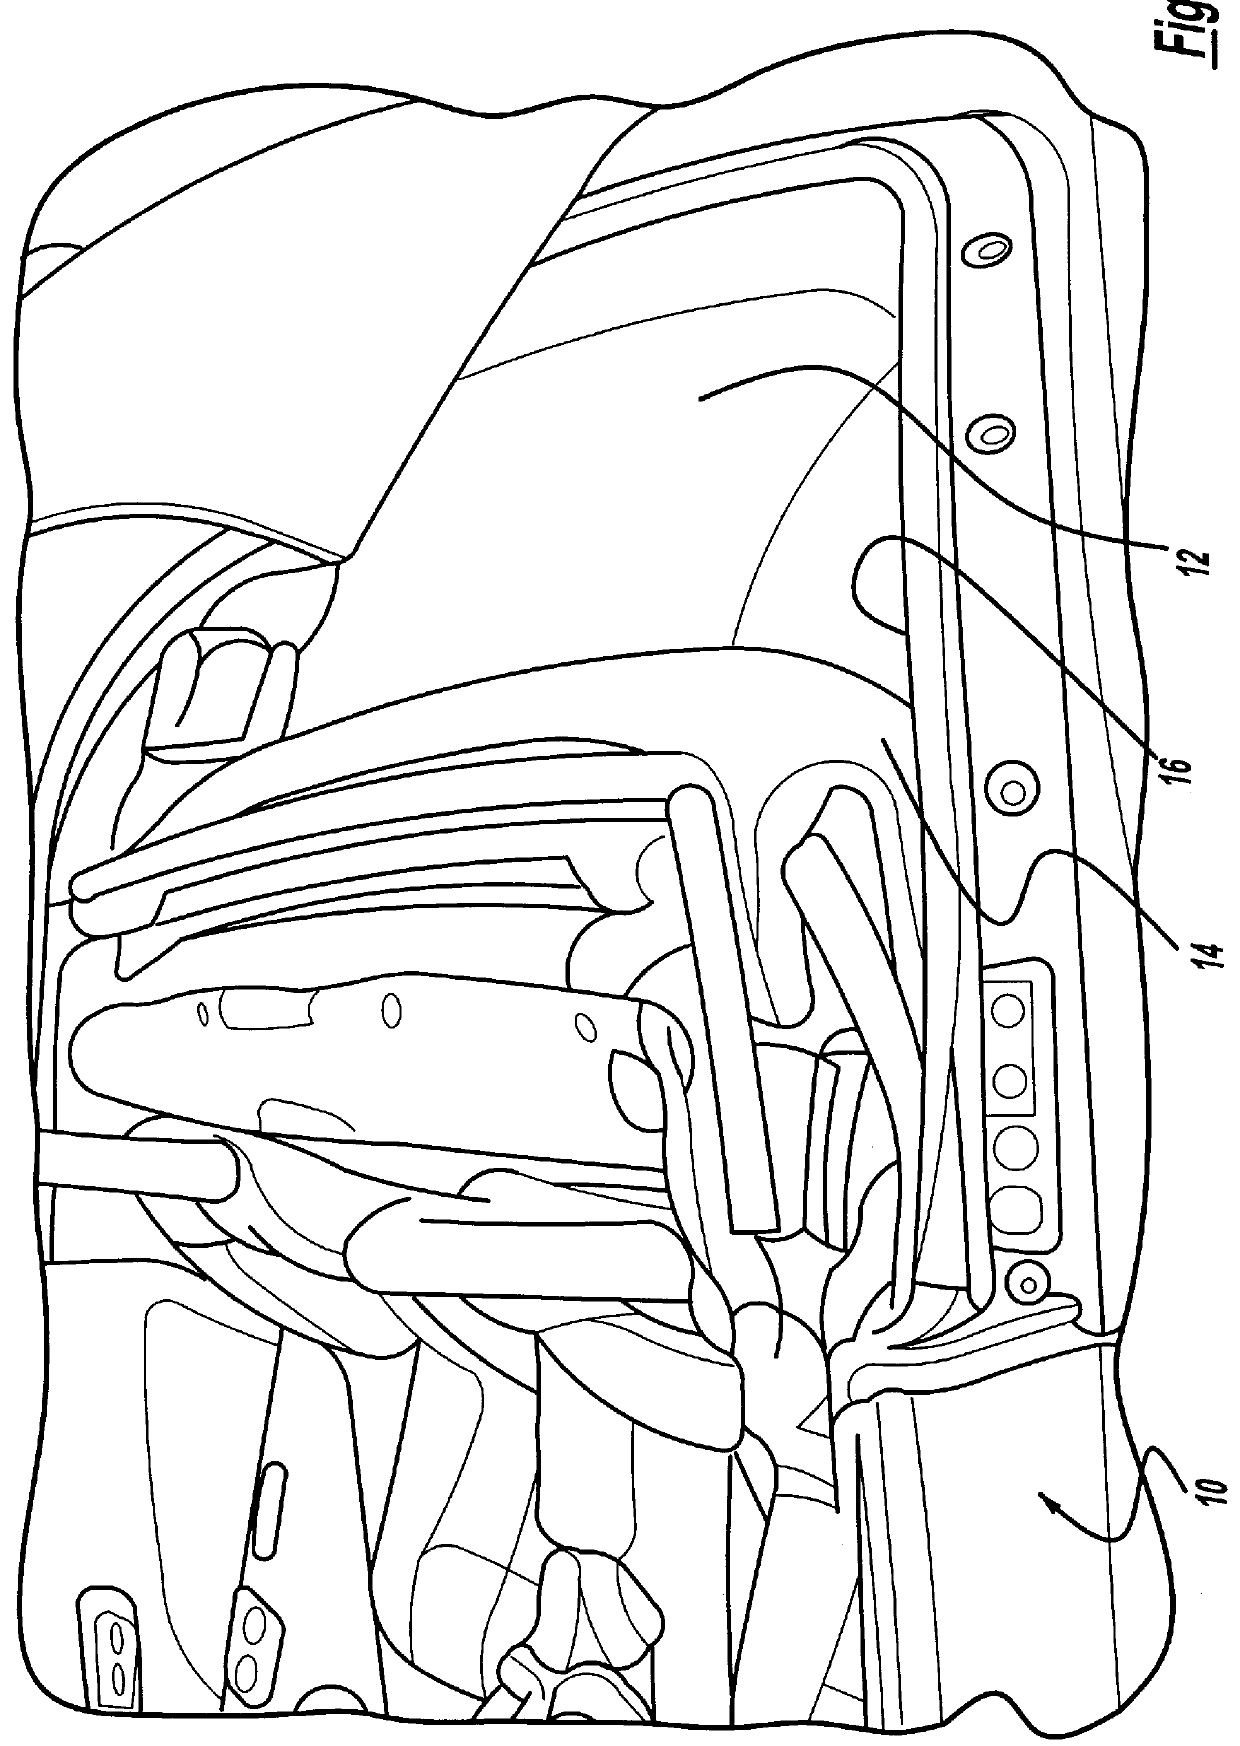 Method of installing a carpet member within a motor vehicle